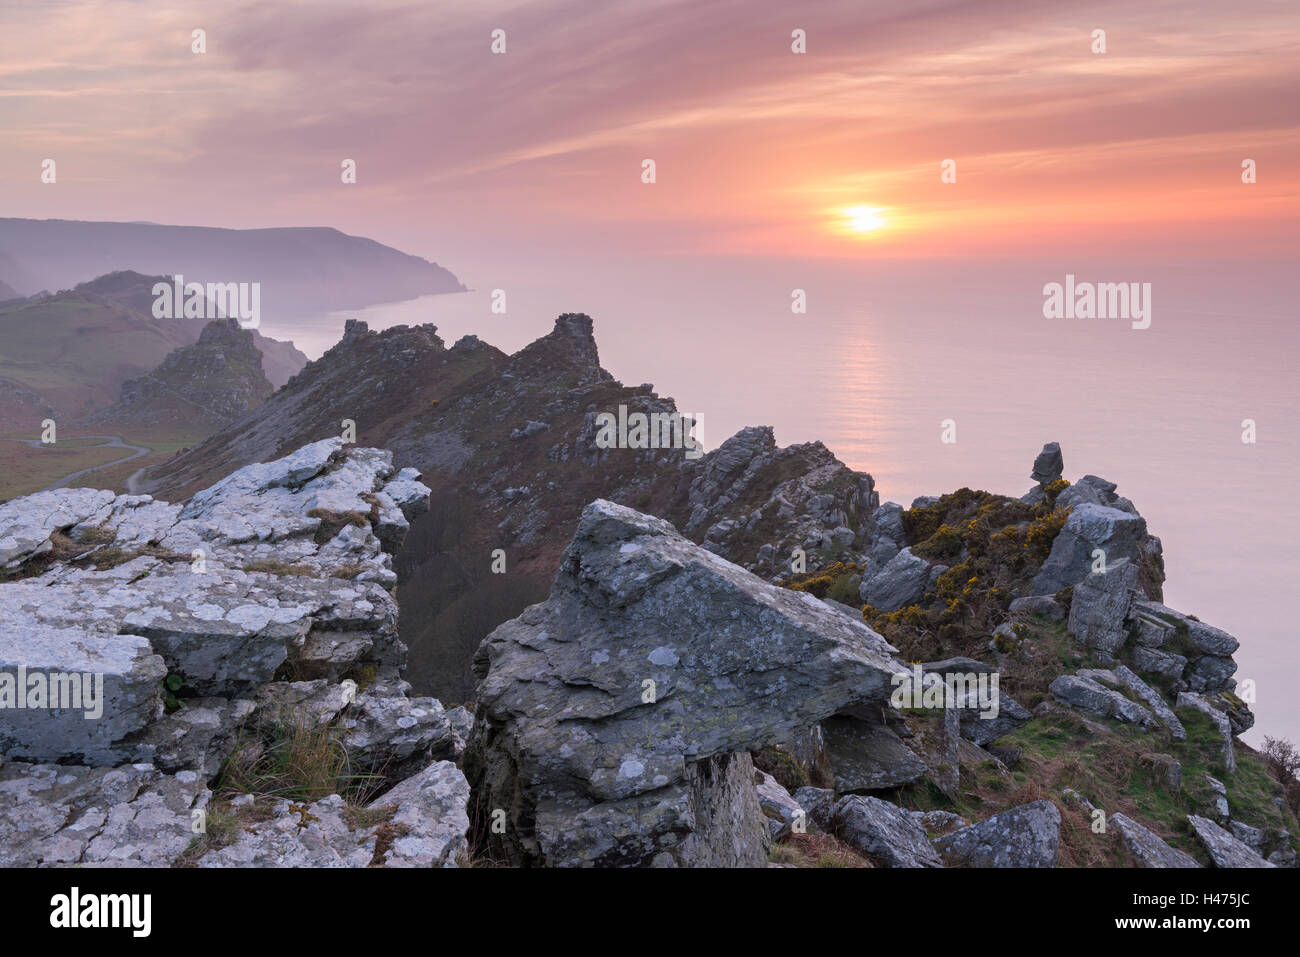 Sunset over the Valley of Rocks in Exmoor National Park, Devon, England. Spring (April) 2015. Stock Photo